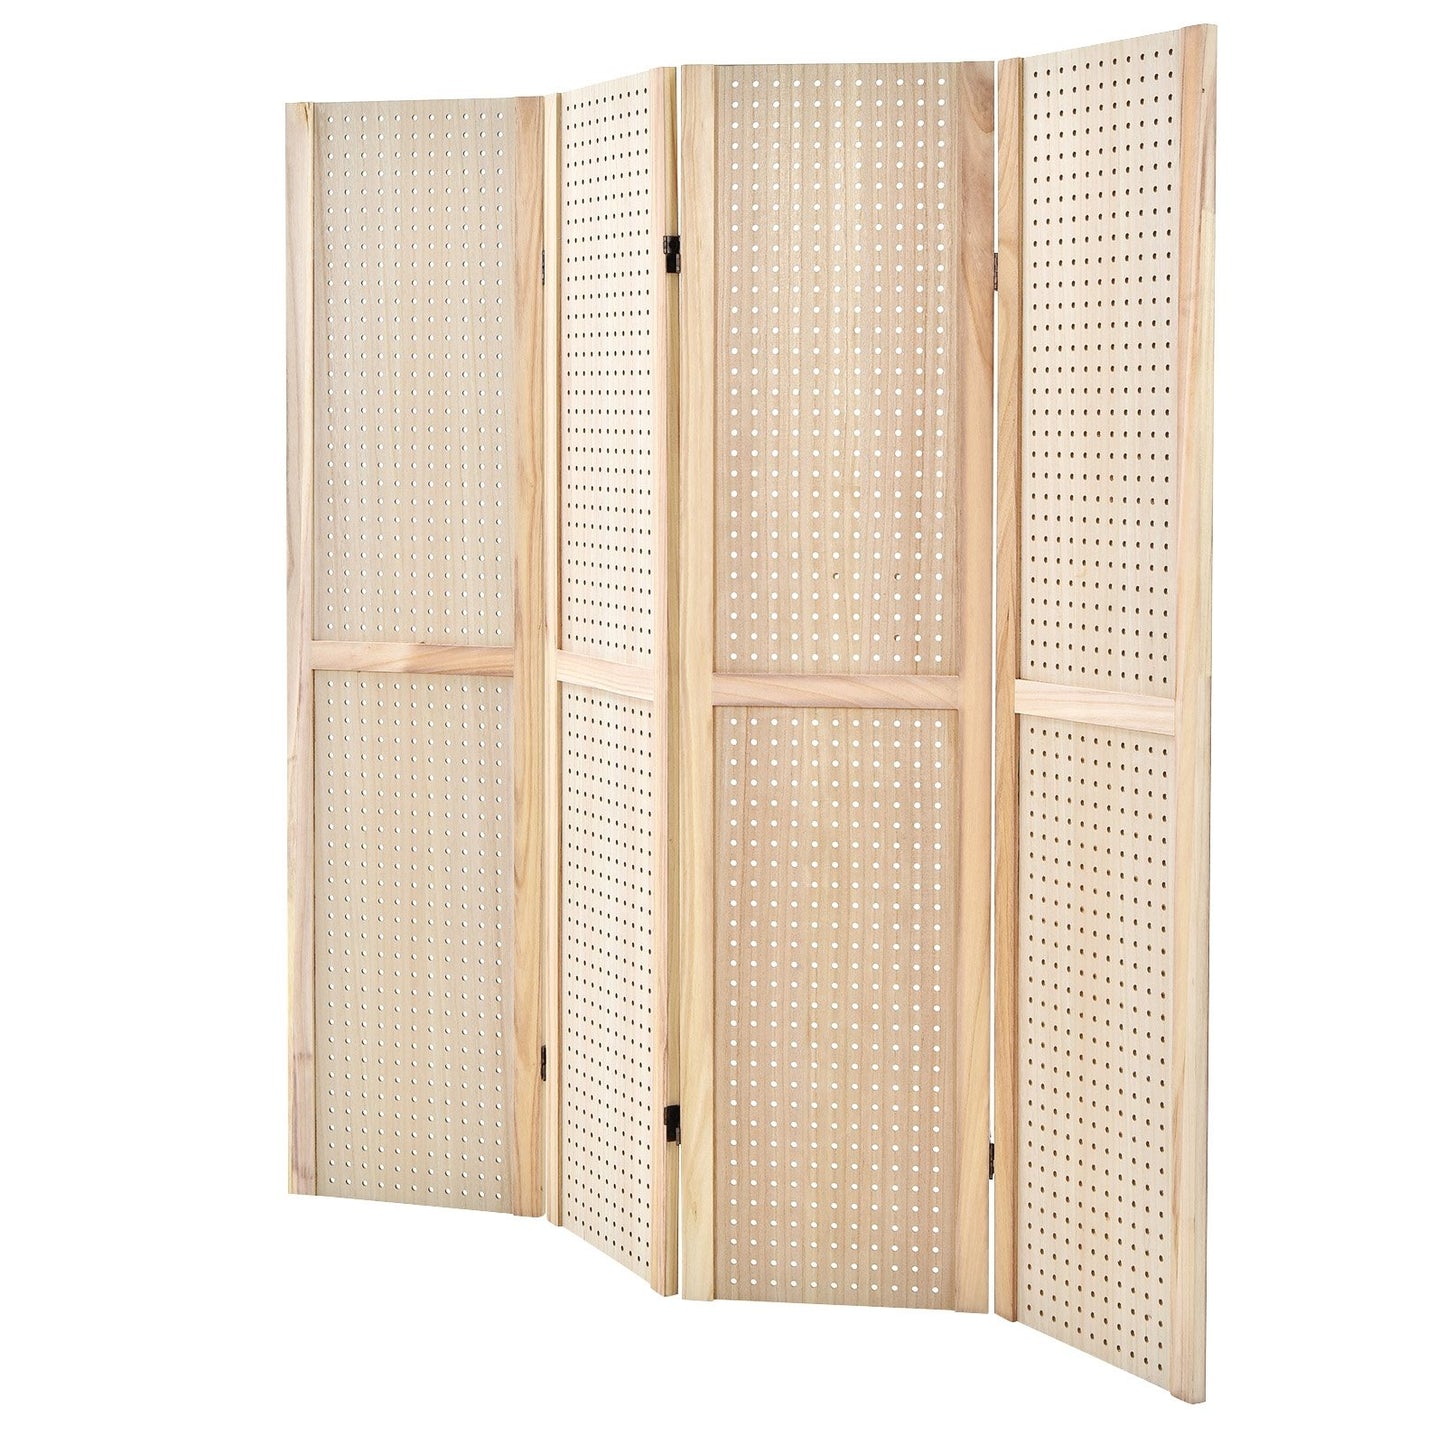 4-Panel Pegboard Display 5 Feet Tall Folding Privacy Screen for Craft Display Organized, Natural